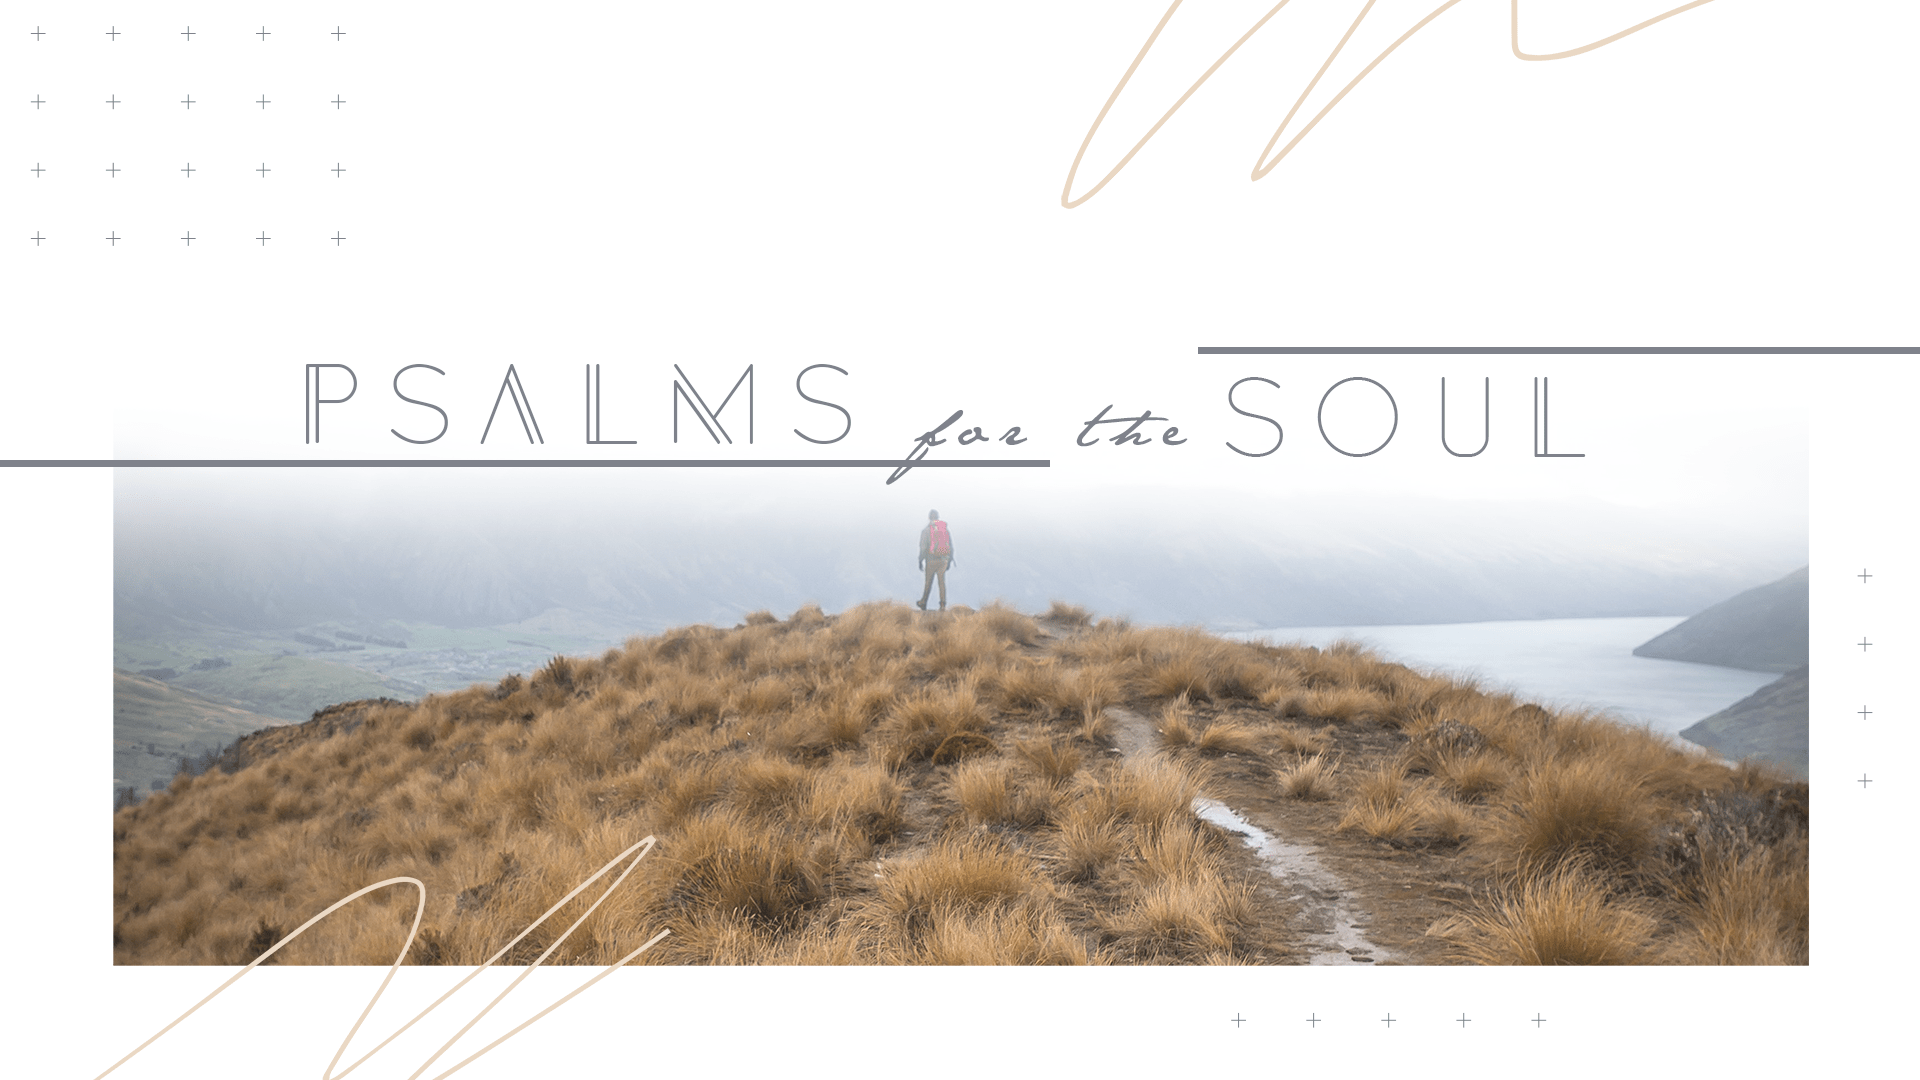 Psalms for the Soul graphic